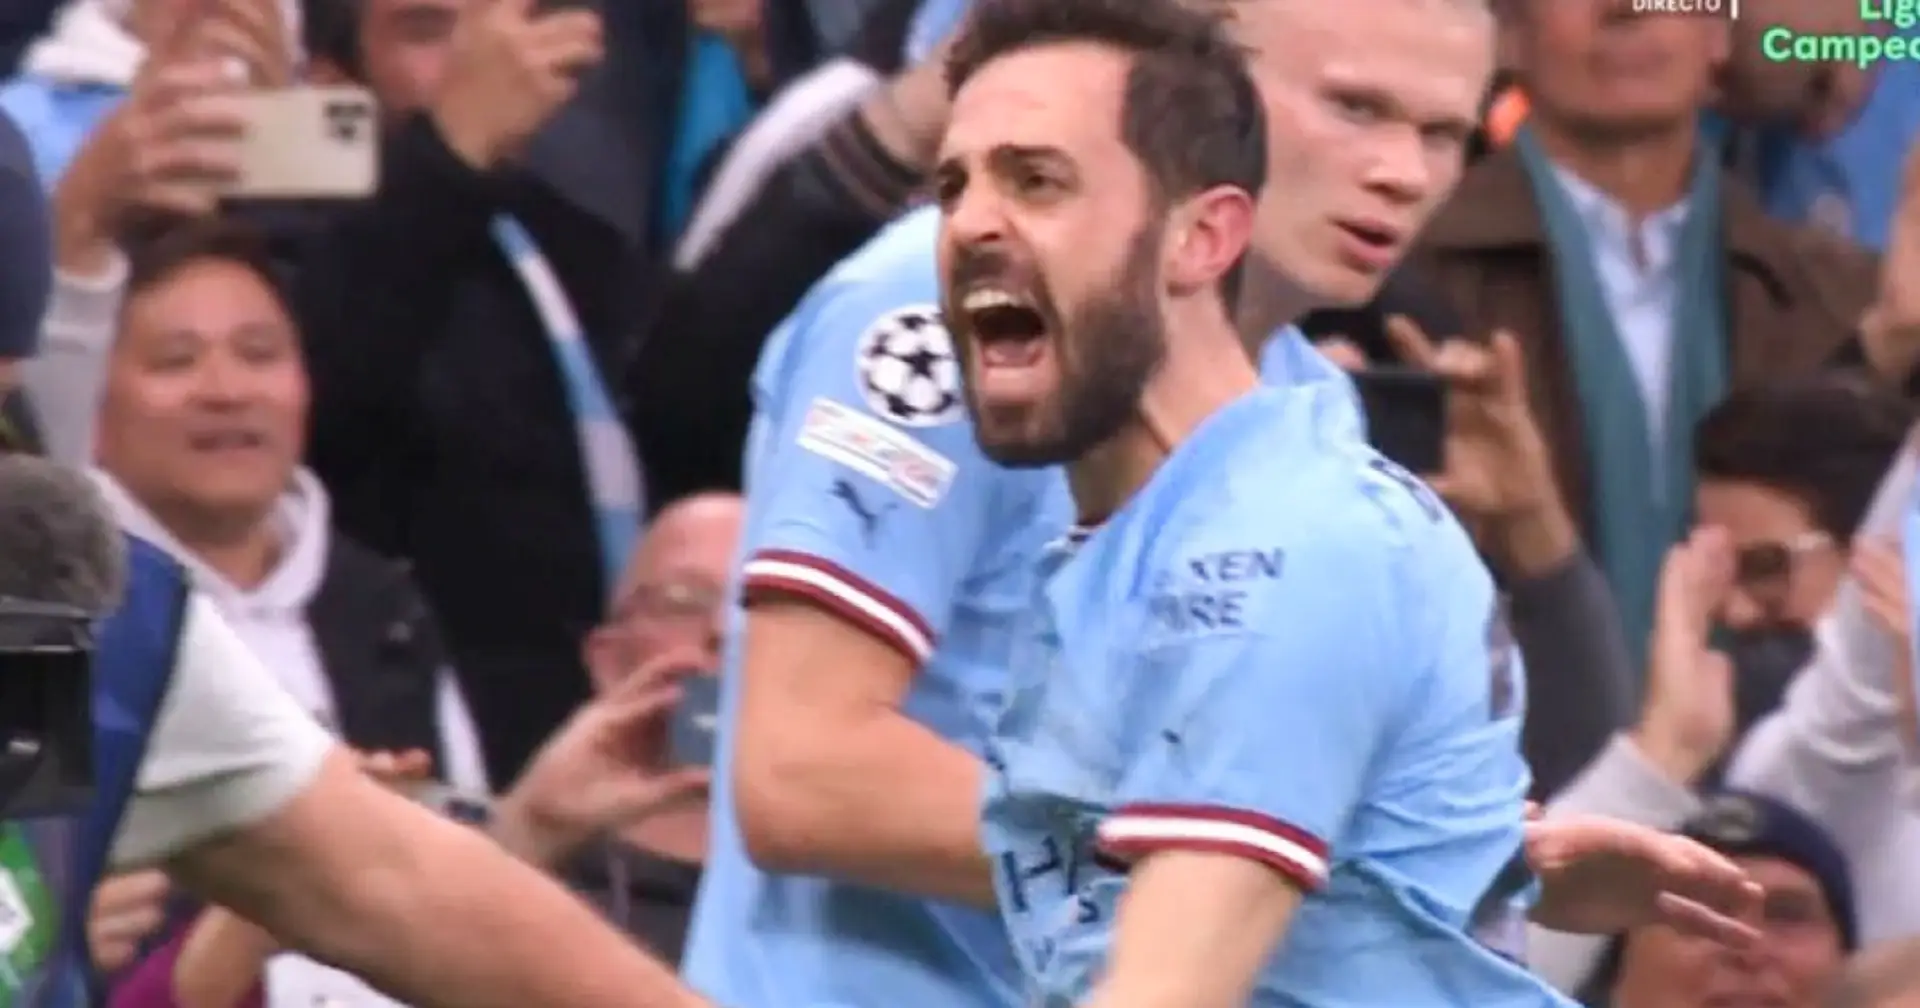 Bernardo Silva desperate to join Barca, chances of meeting his €58m release clause revealed